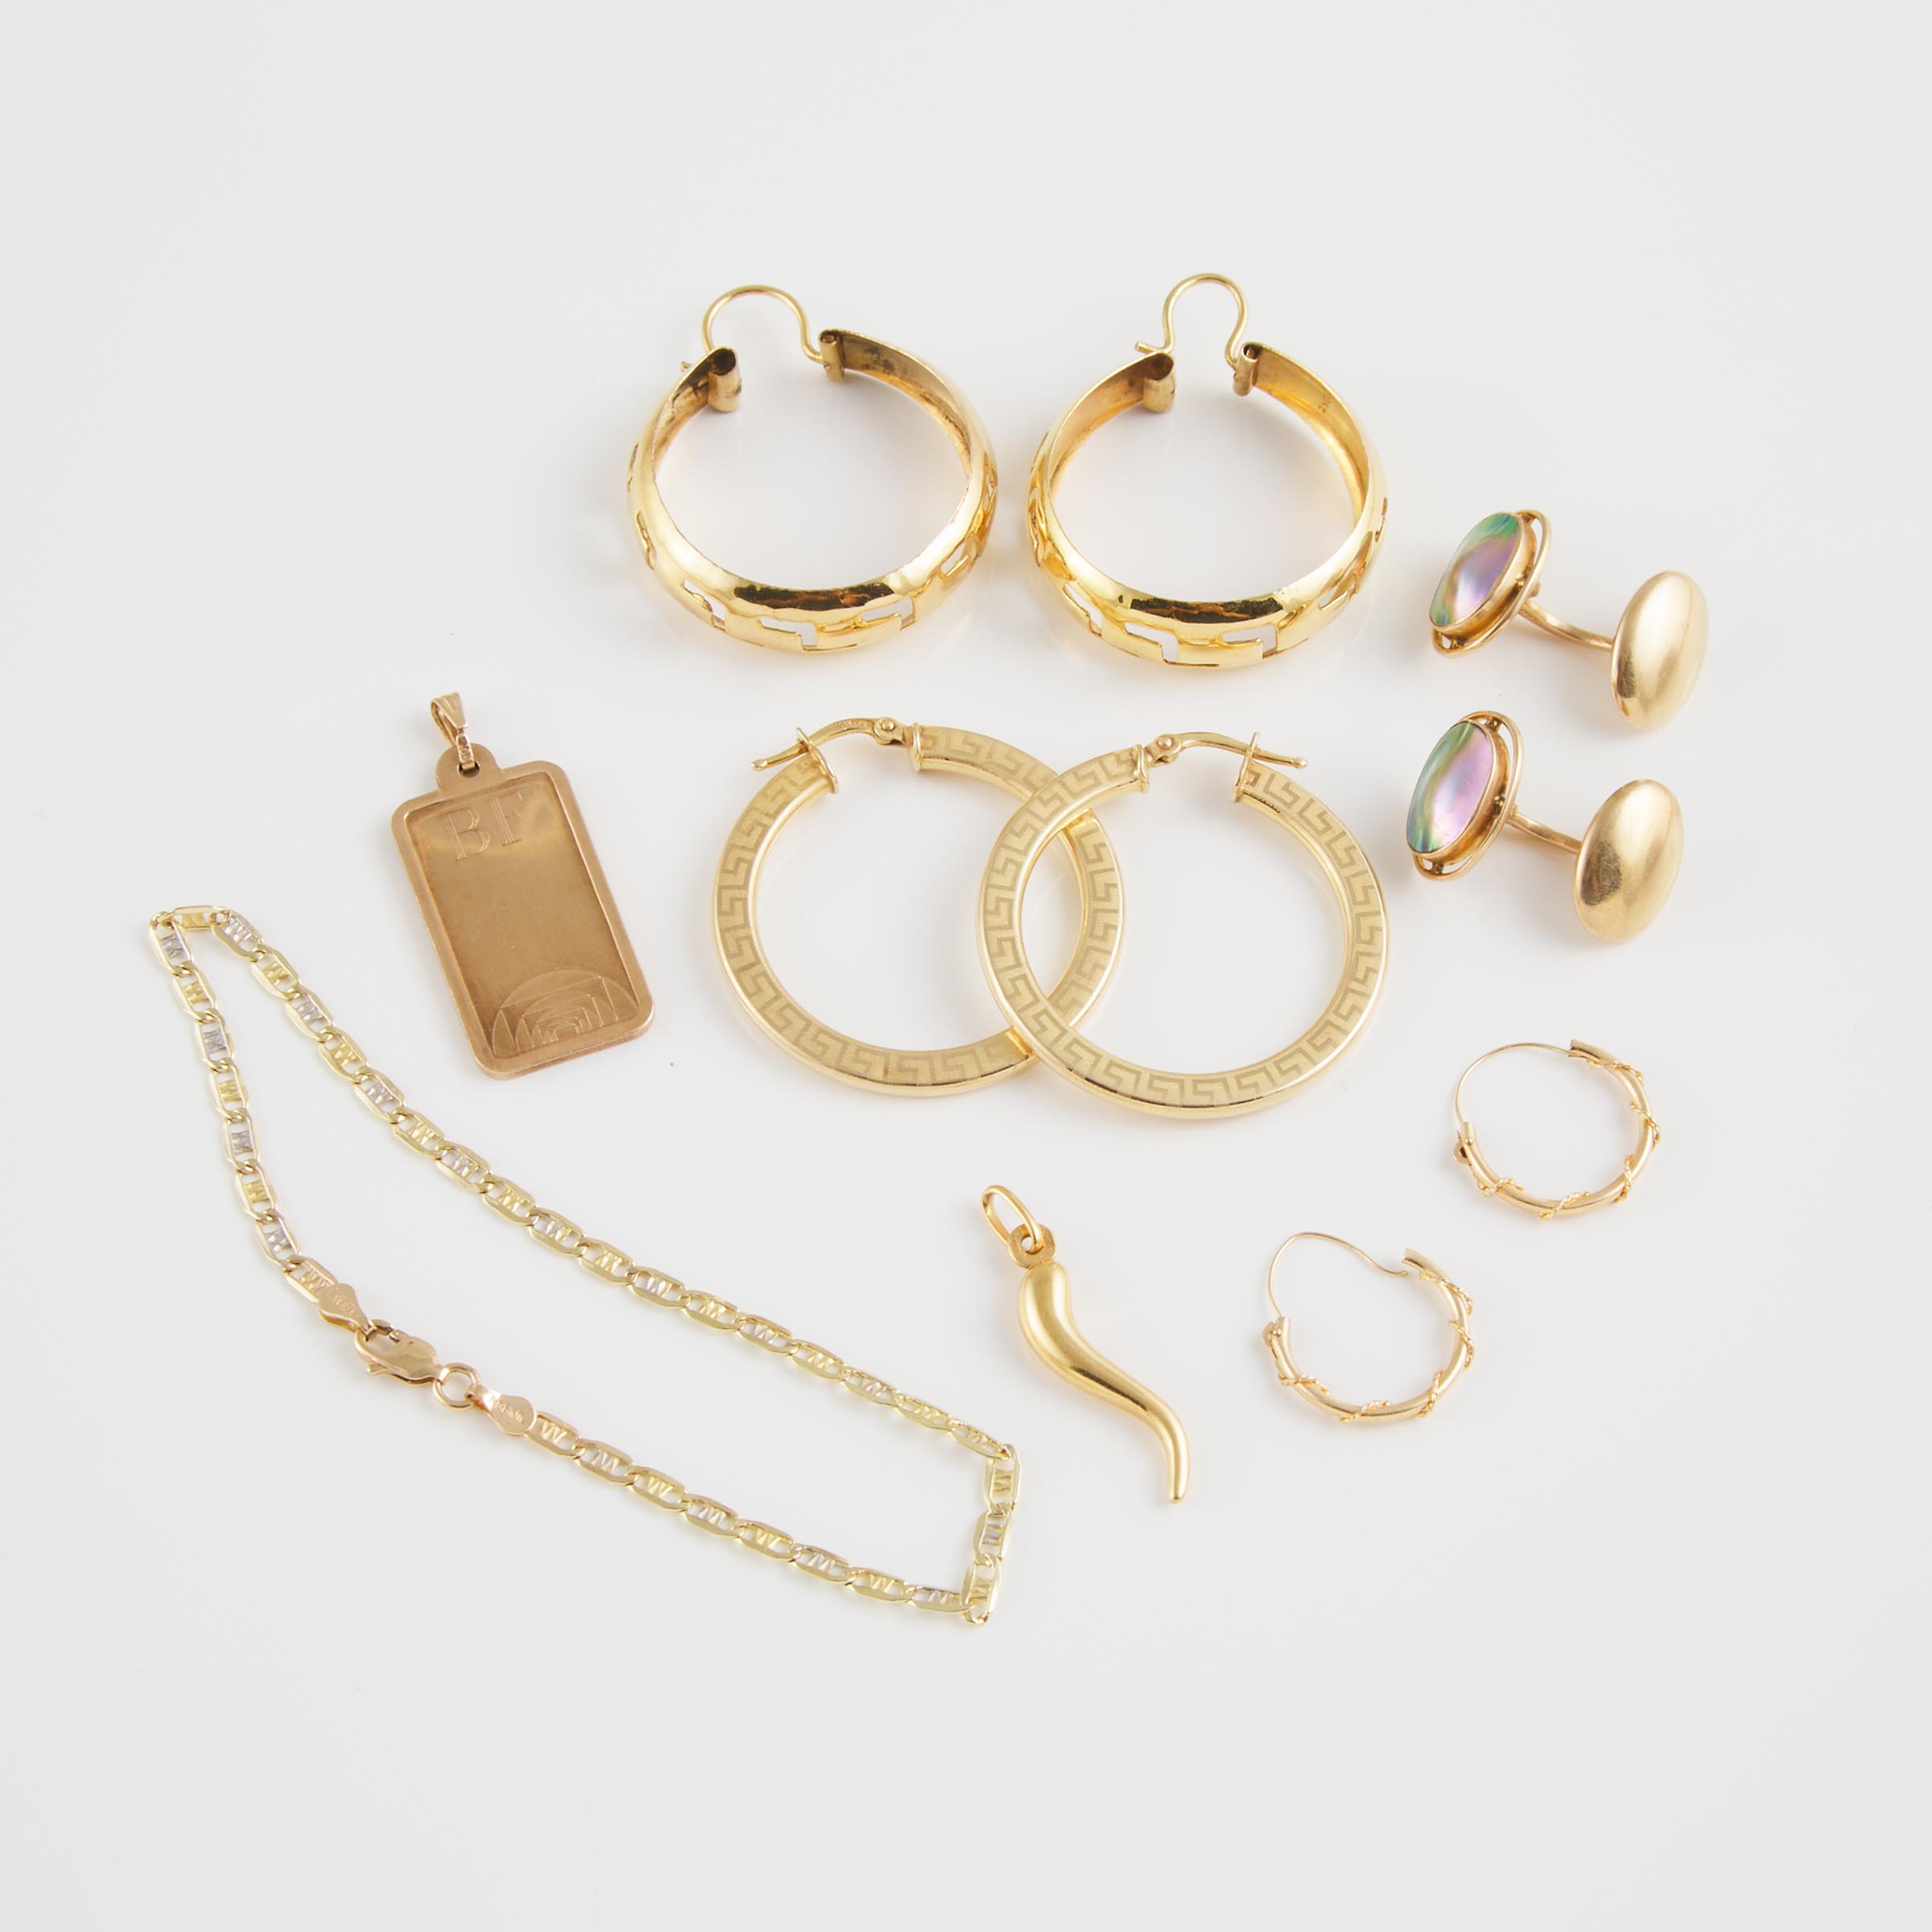 Small Quantity Of Yellow Gold Jewellery